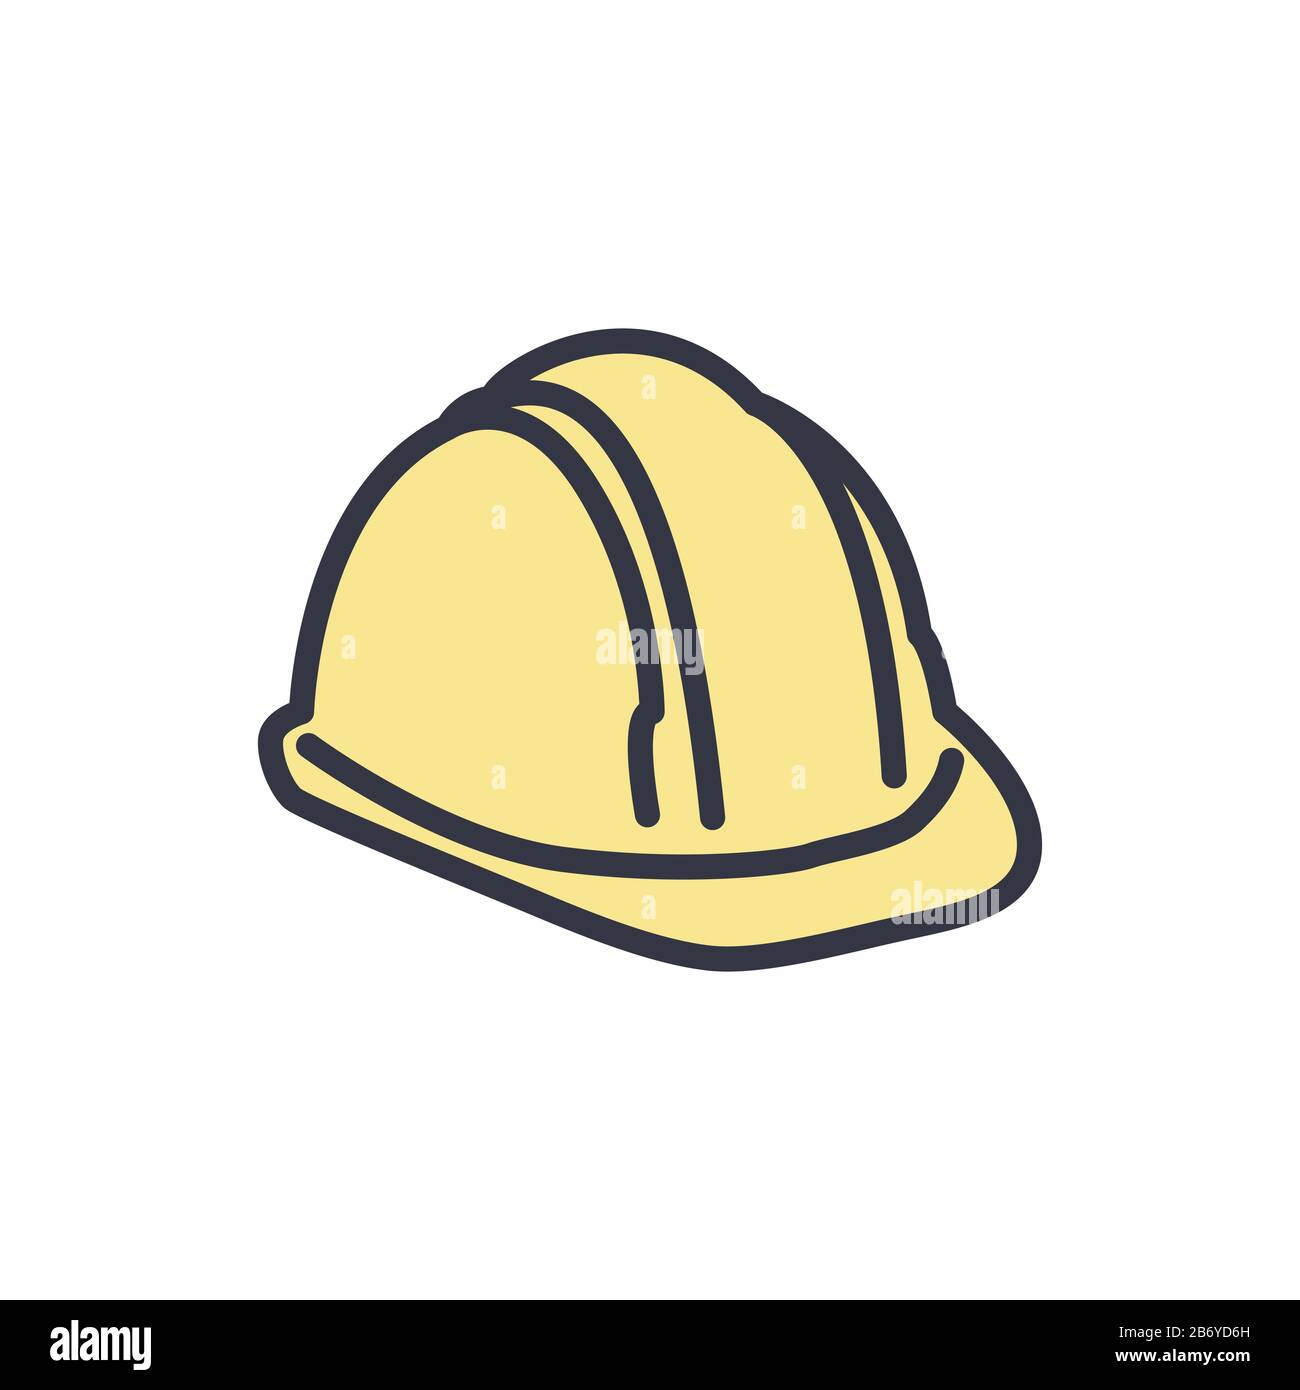 Health Safety and Environment Icon -  the safety side of things Stock Vector